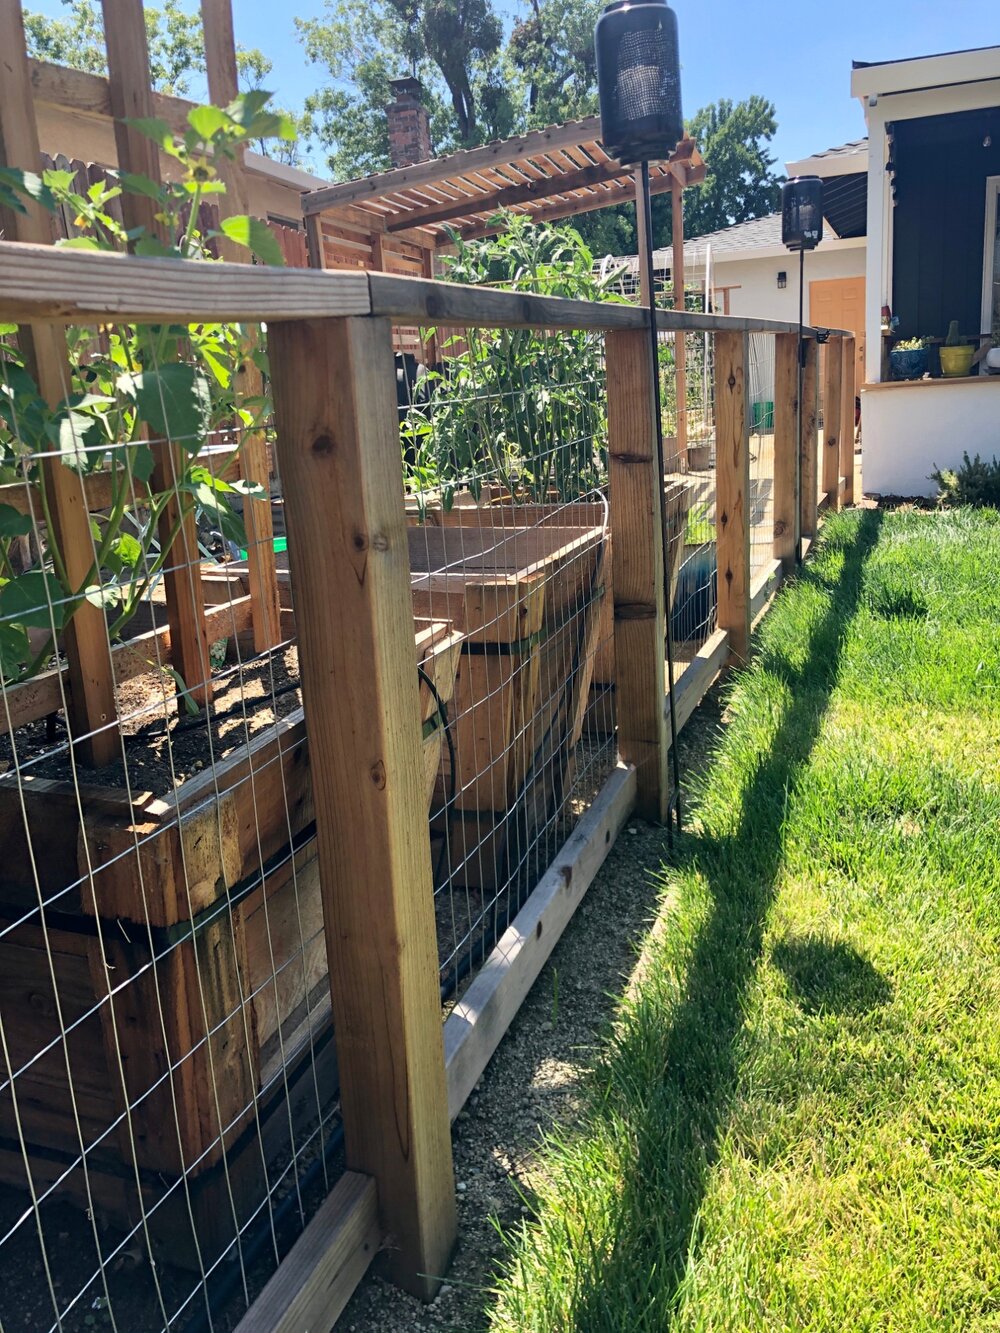 DIY Hog Wire Garden Fence for under $300 - Our Liberty House